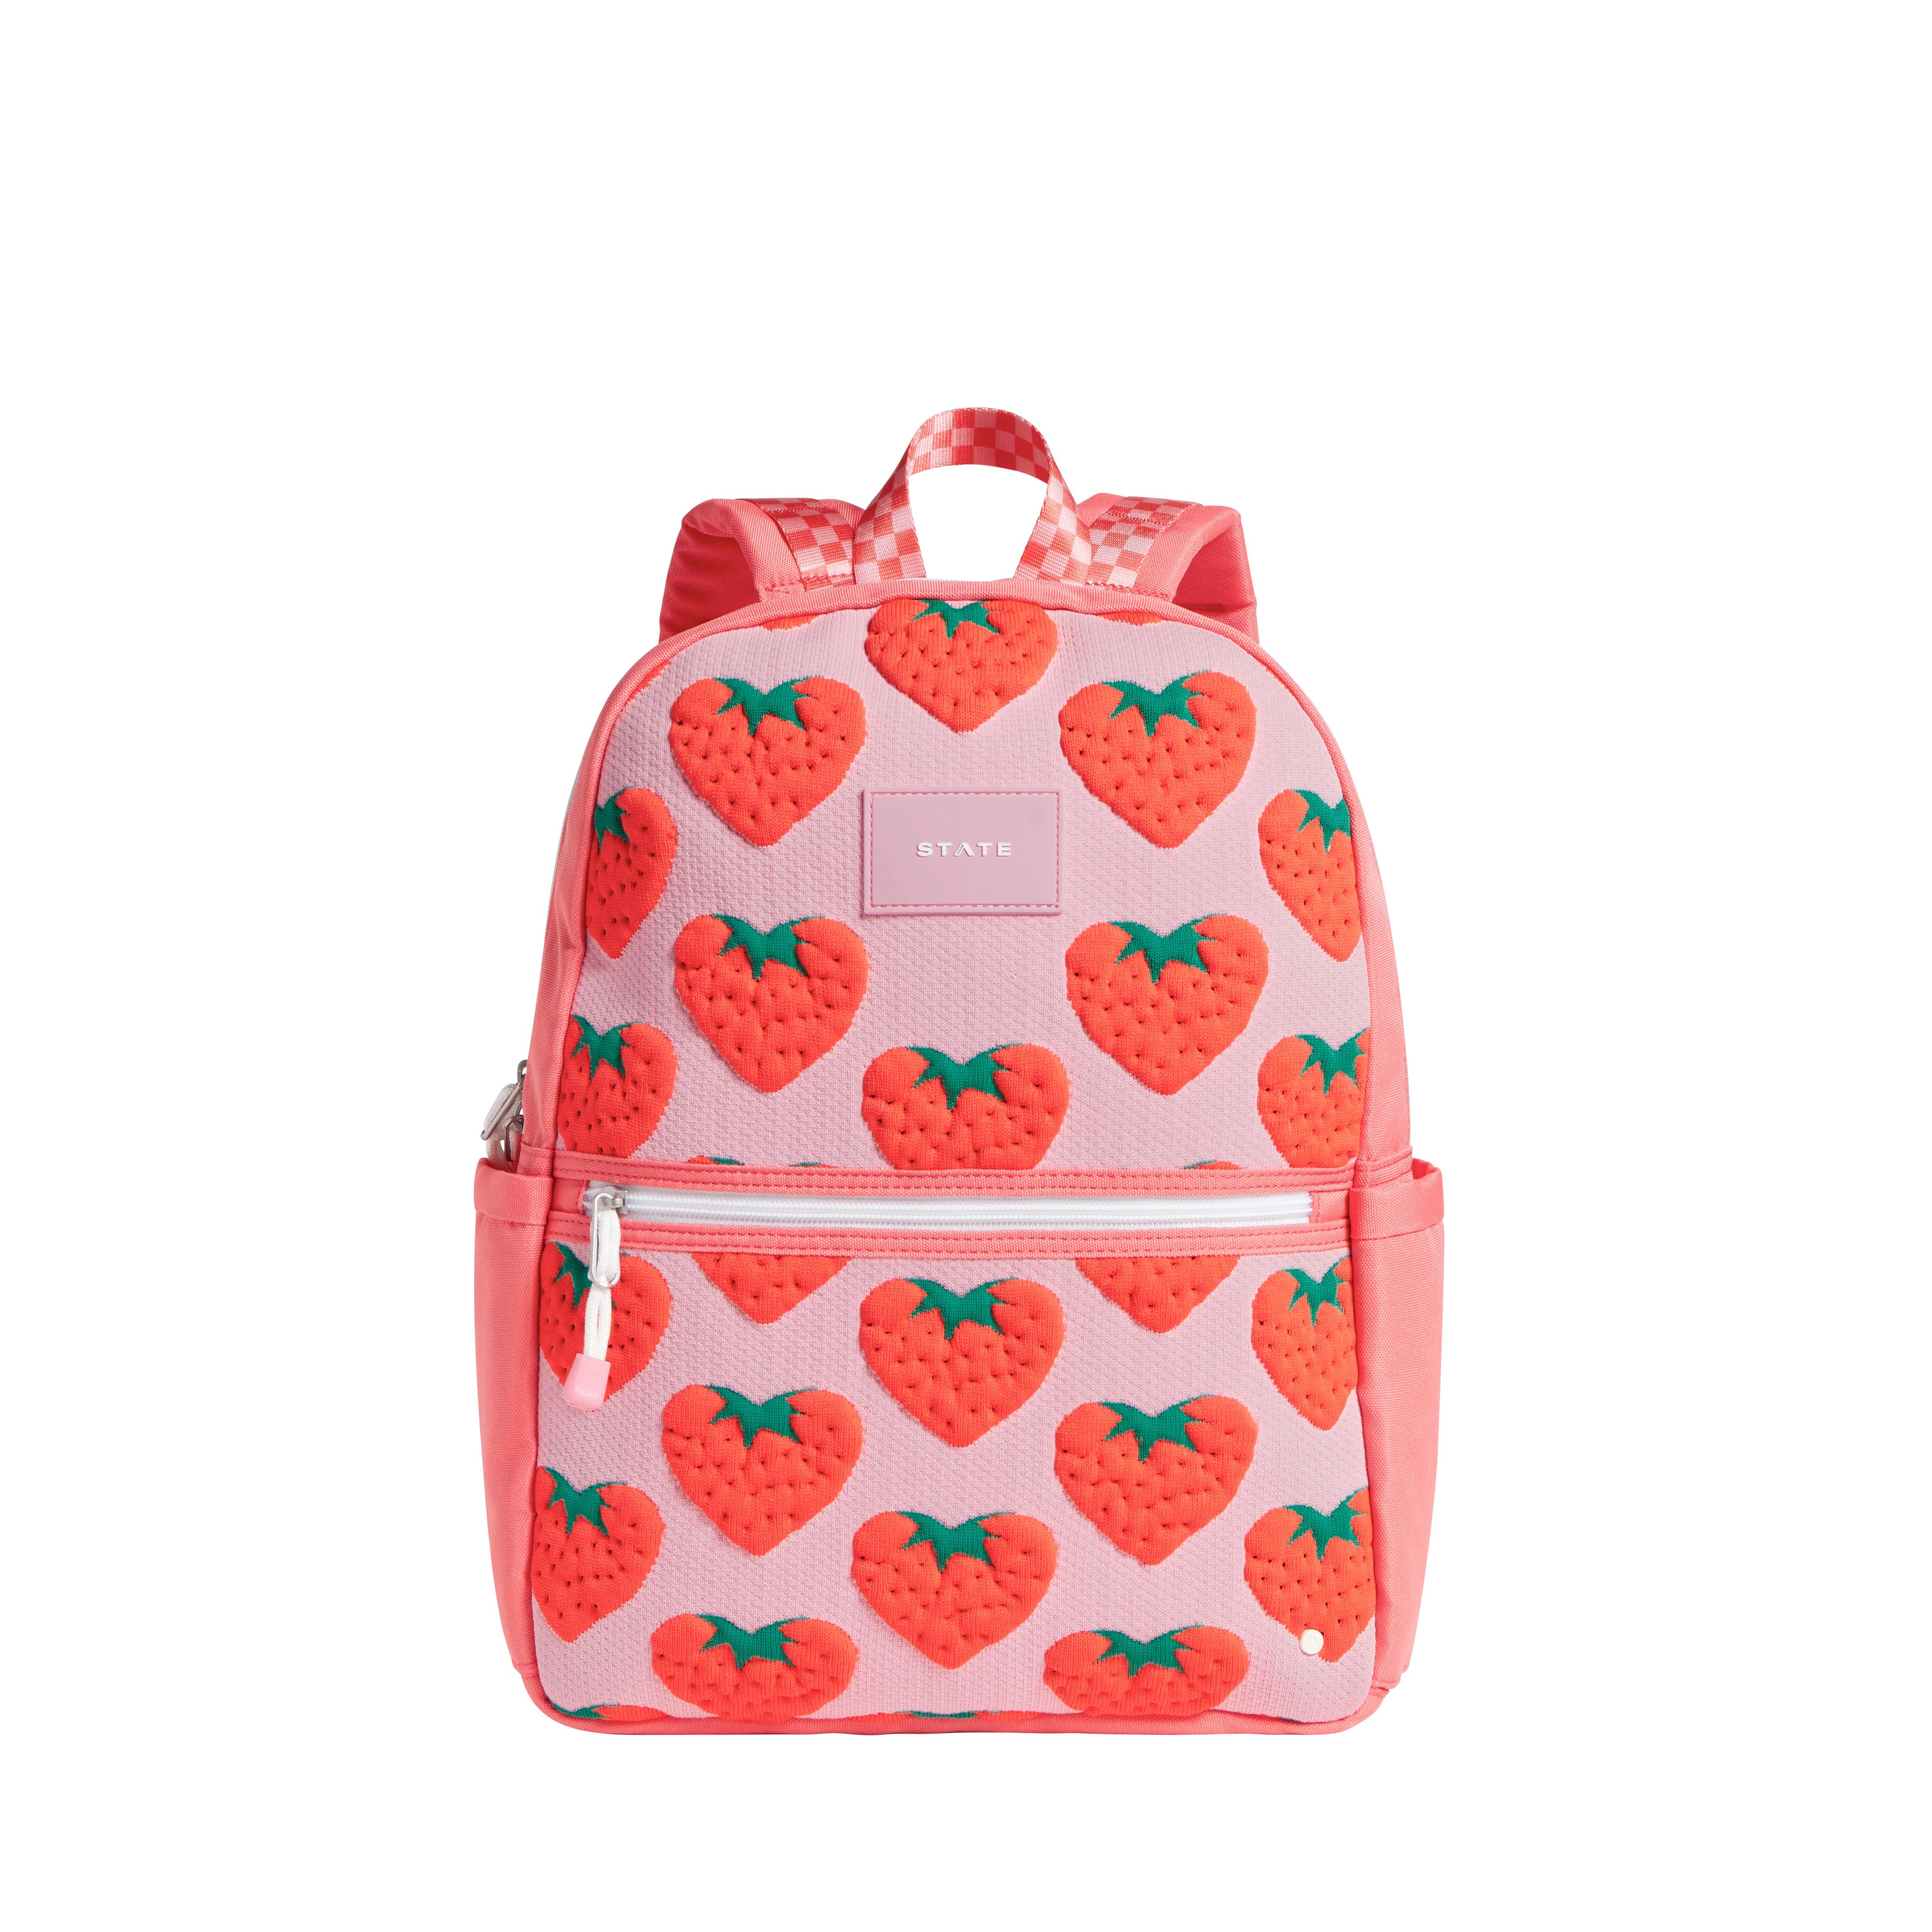 STATE Bags | Kane Kids Double Pocket Backpack Intarsia Strawberries | STATE Bags